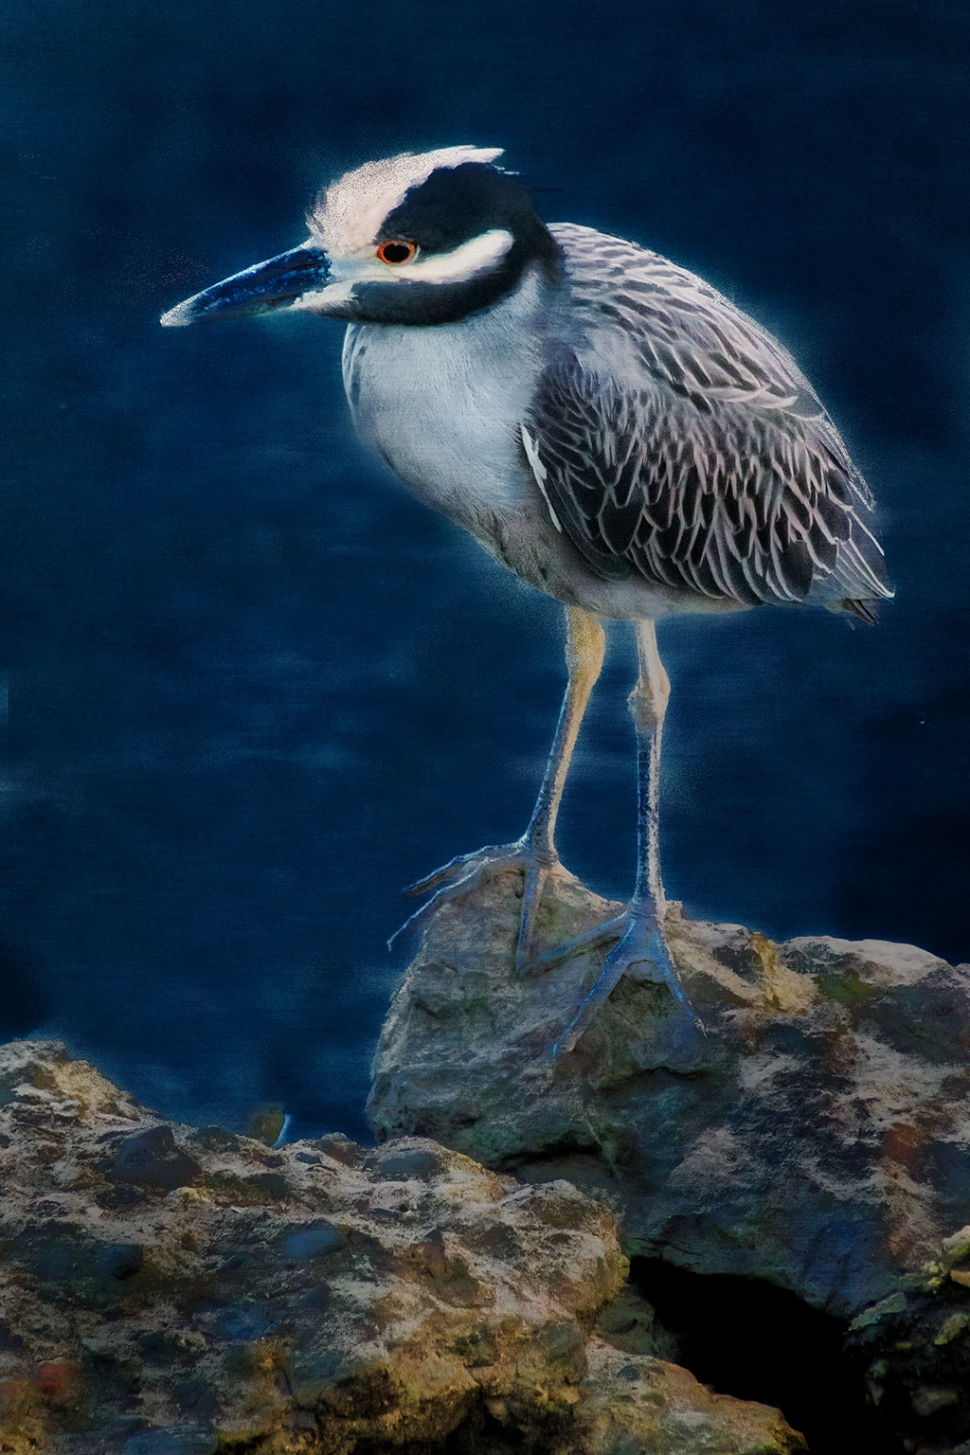 Photo of the Week "Yellow crowned night heron, a rare sight in Ventura" by Bob Crum. Photo data: Canon 7D MKII camera, ISO 10,000, Tamron 16-300 lens @277mm, aperture f/11, shutter speed 1/320 of a second.